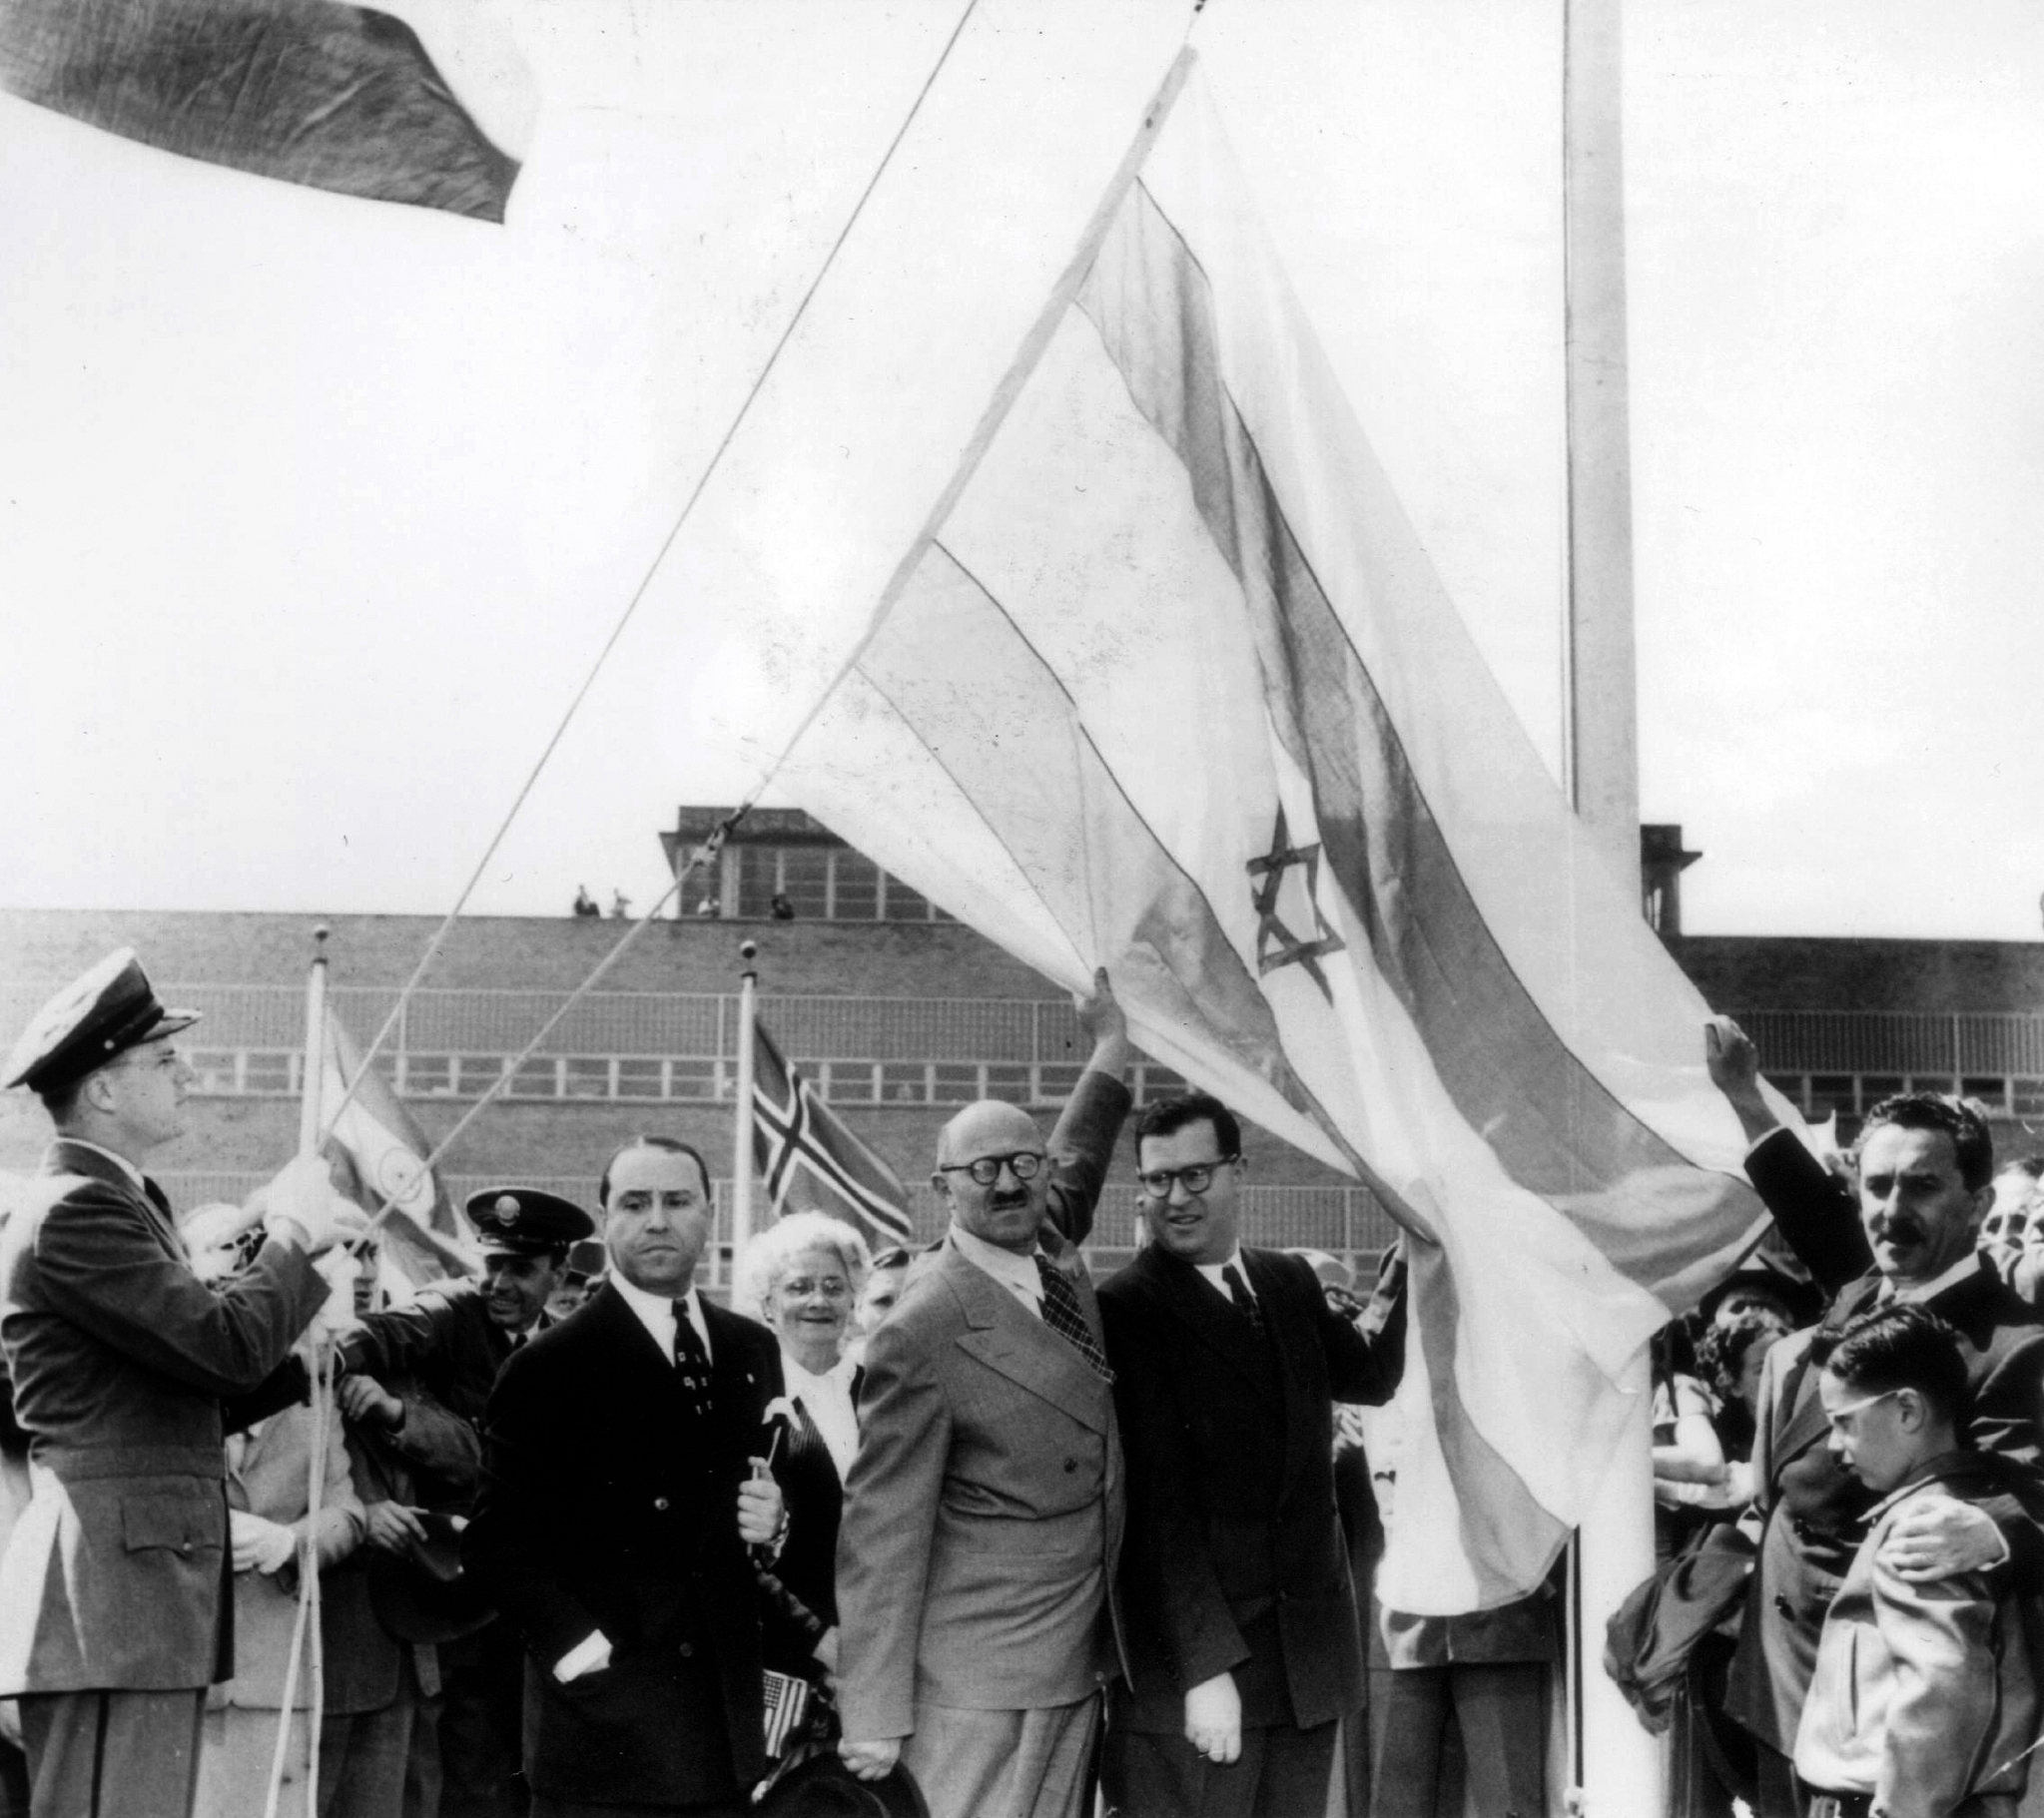  Moshe Sharett (C), Abba Eban (2nd R) and David Hacohen (R), raise what would become the Israeli flag after the United Nations decided to approve the partition of Palestine November 29, 1947 in New York. (Photo by GPO via Getty Images)